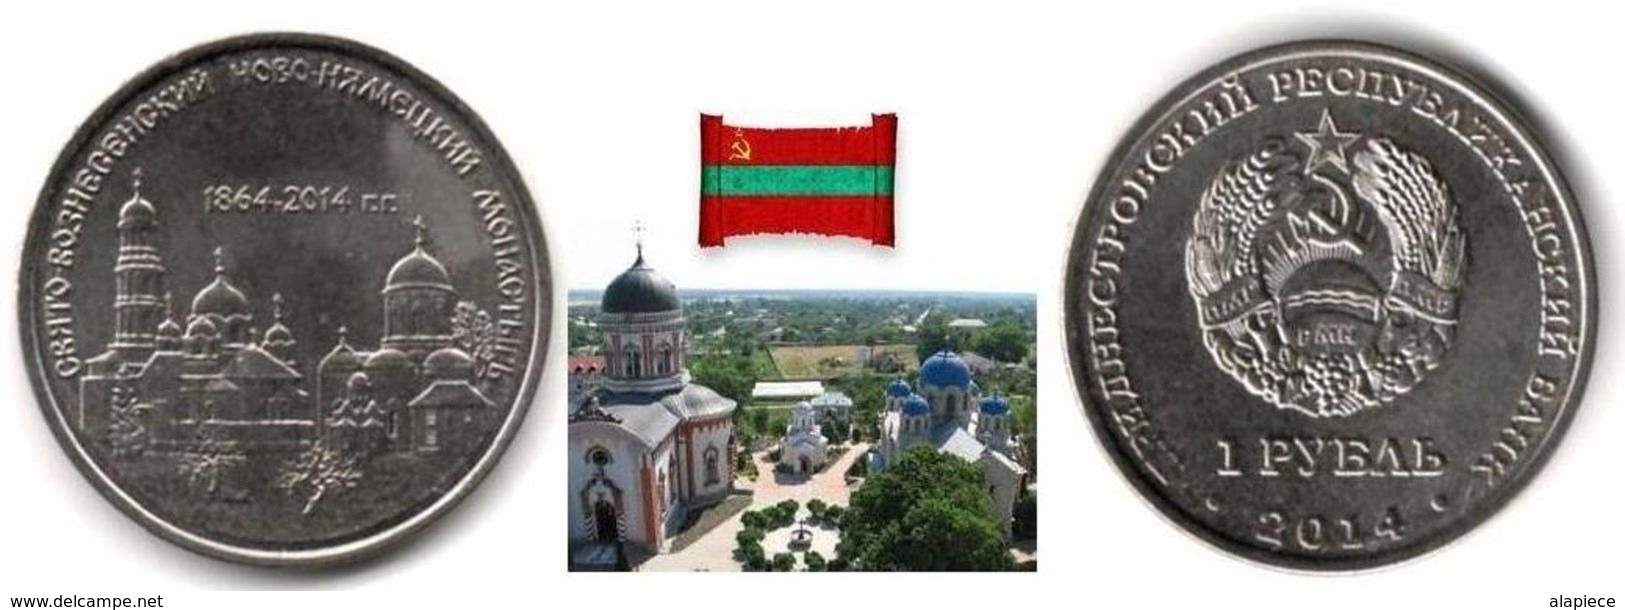 Transnistria - 1 Rouble 2014 (UNC - Holy Ascension New Neamt Monastery - 50,000 Ex.) - Moldavia